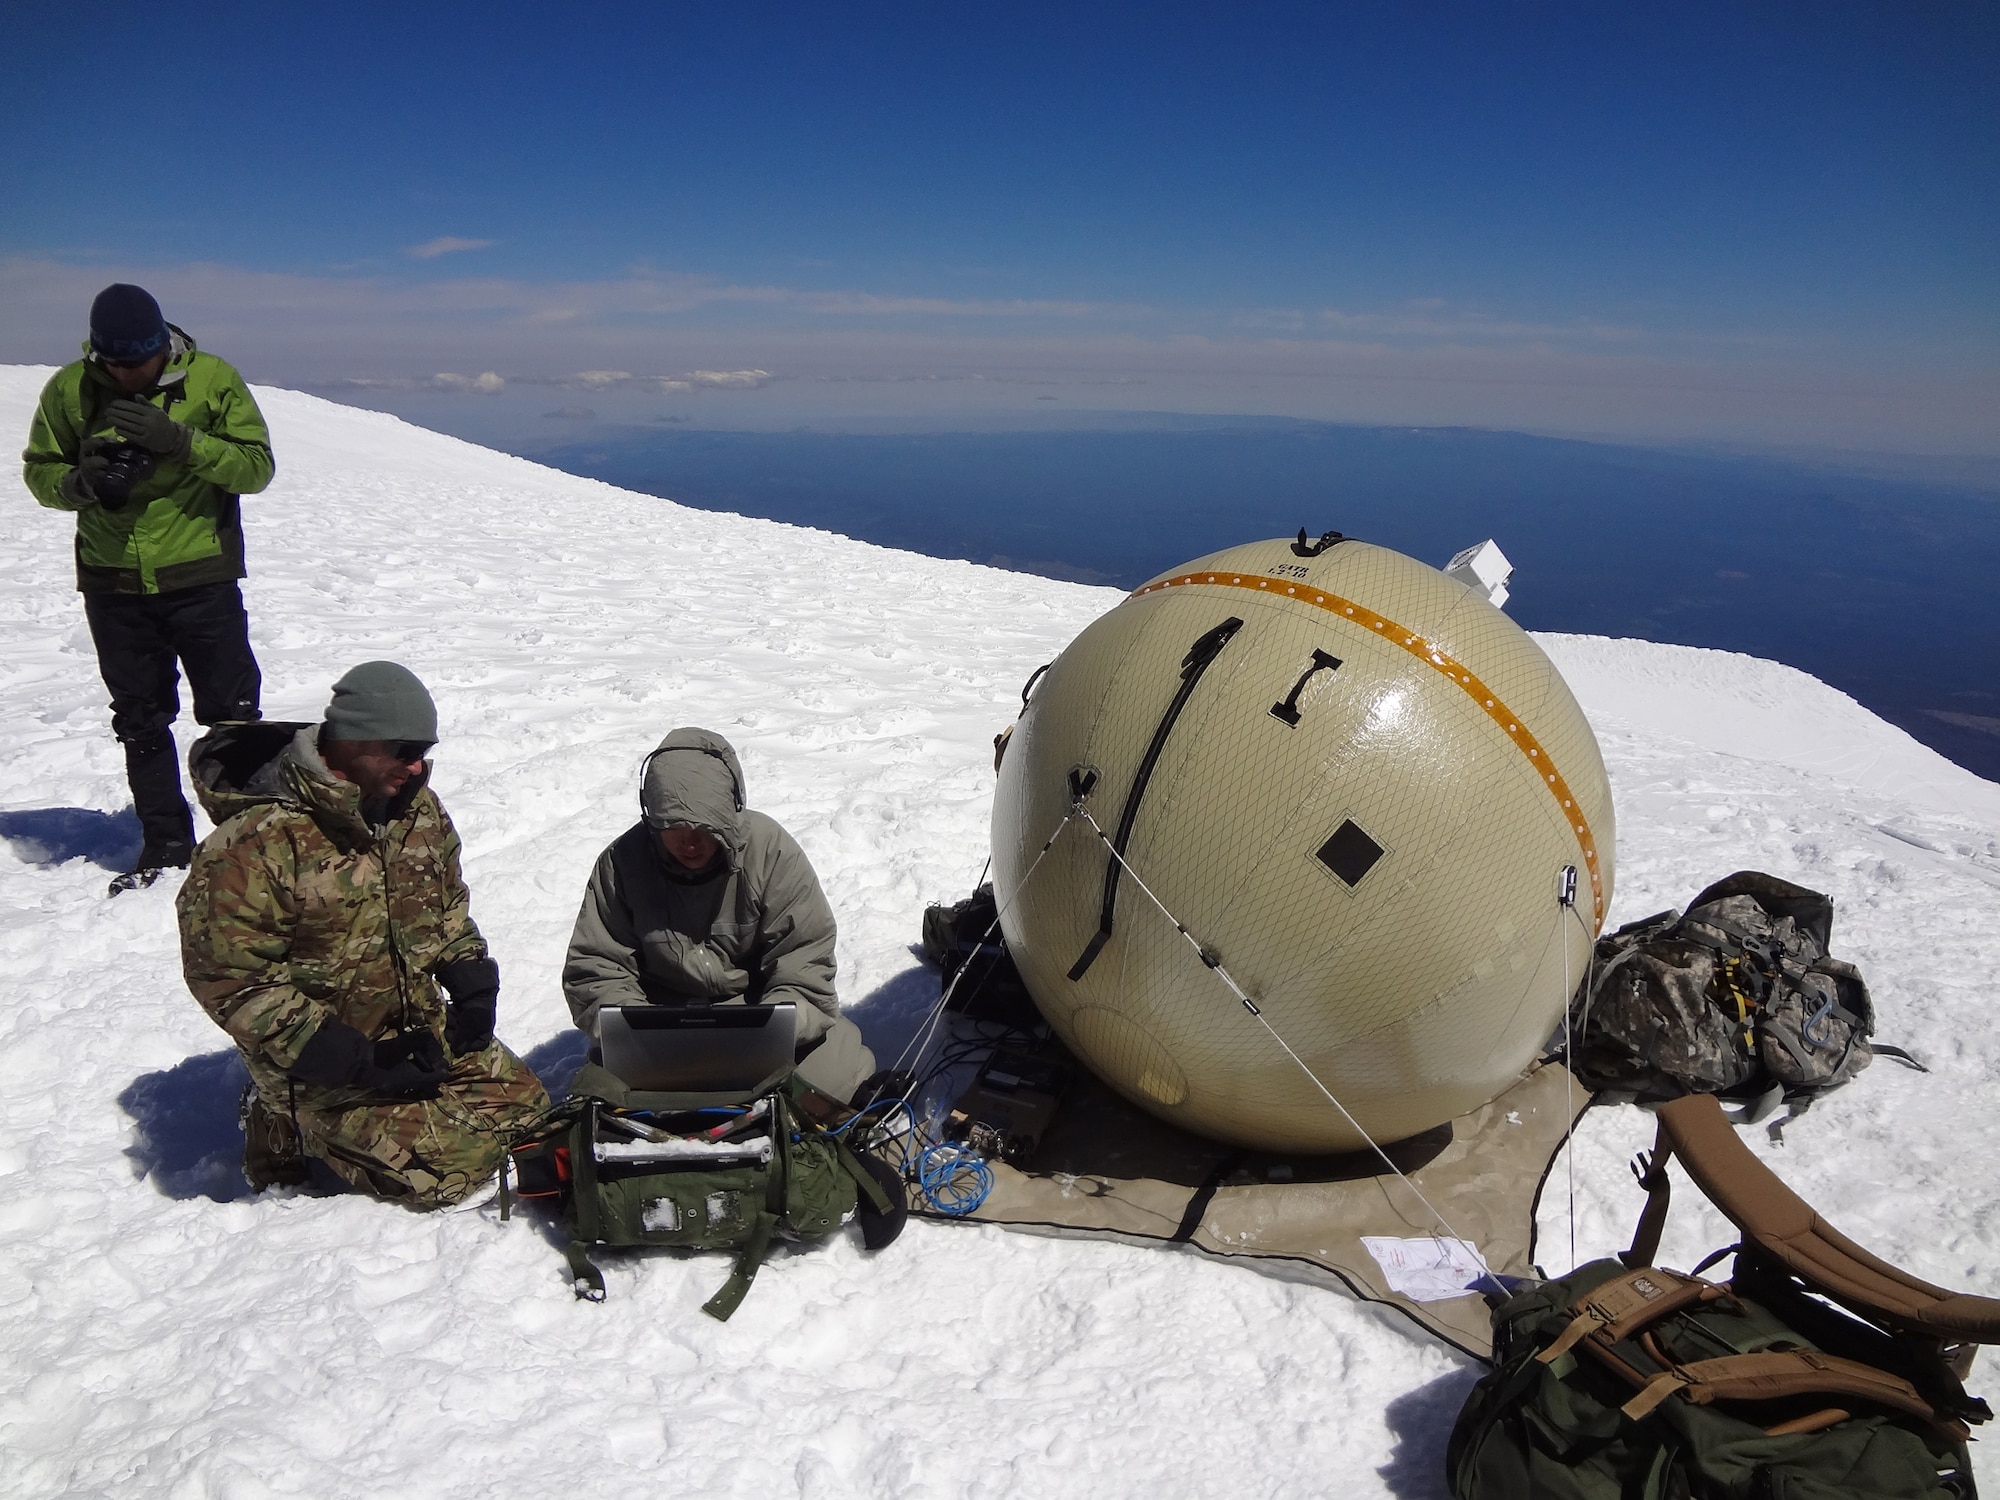 A GATR inflatable satellite communications antenna terminal is used during a special operations forces exercise in Mt Adams, Washington. (Air Force photo)